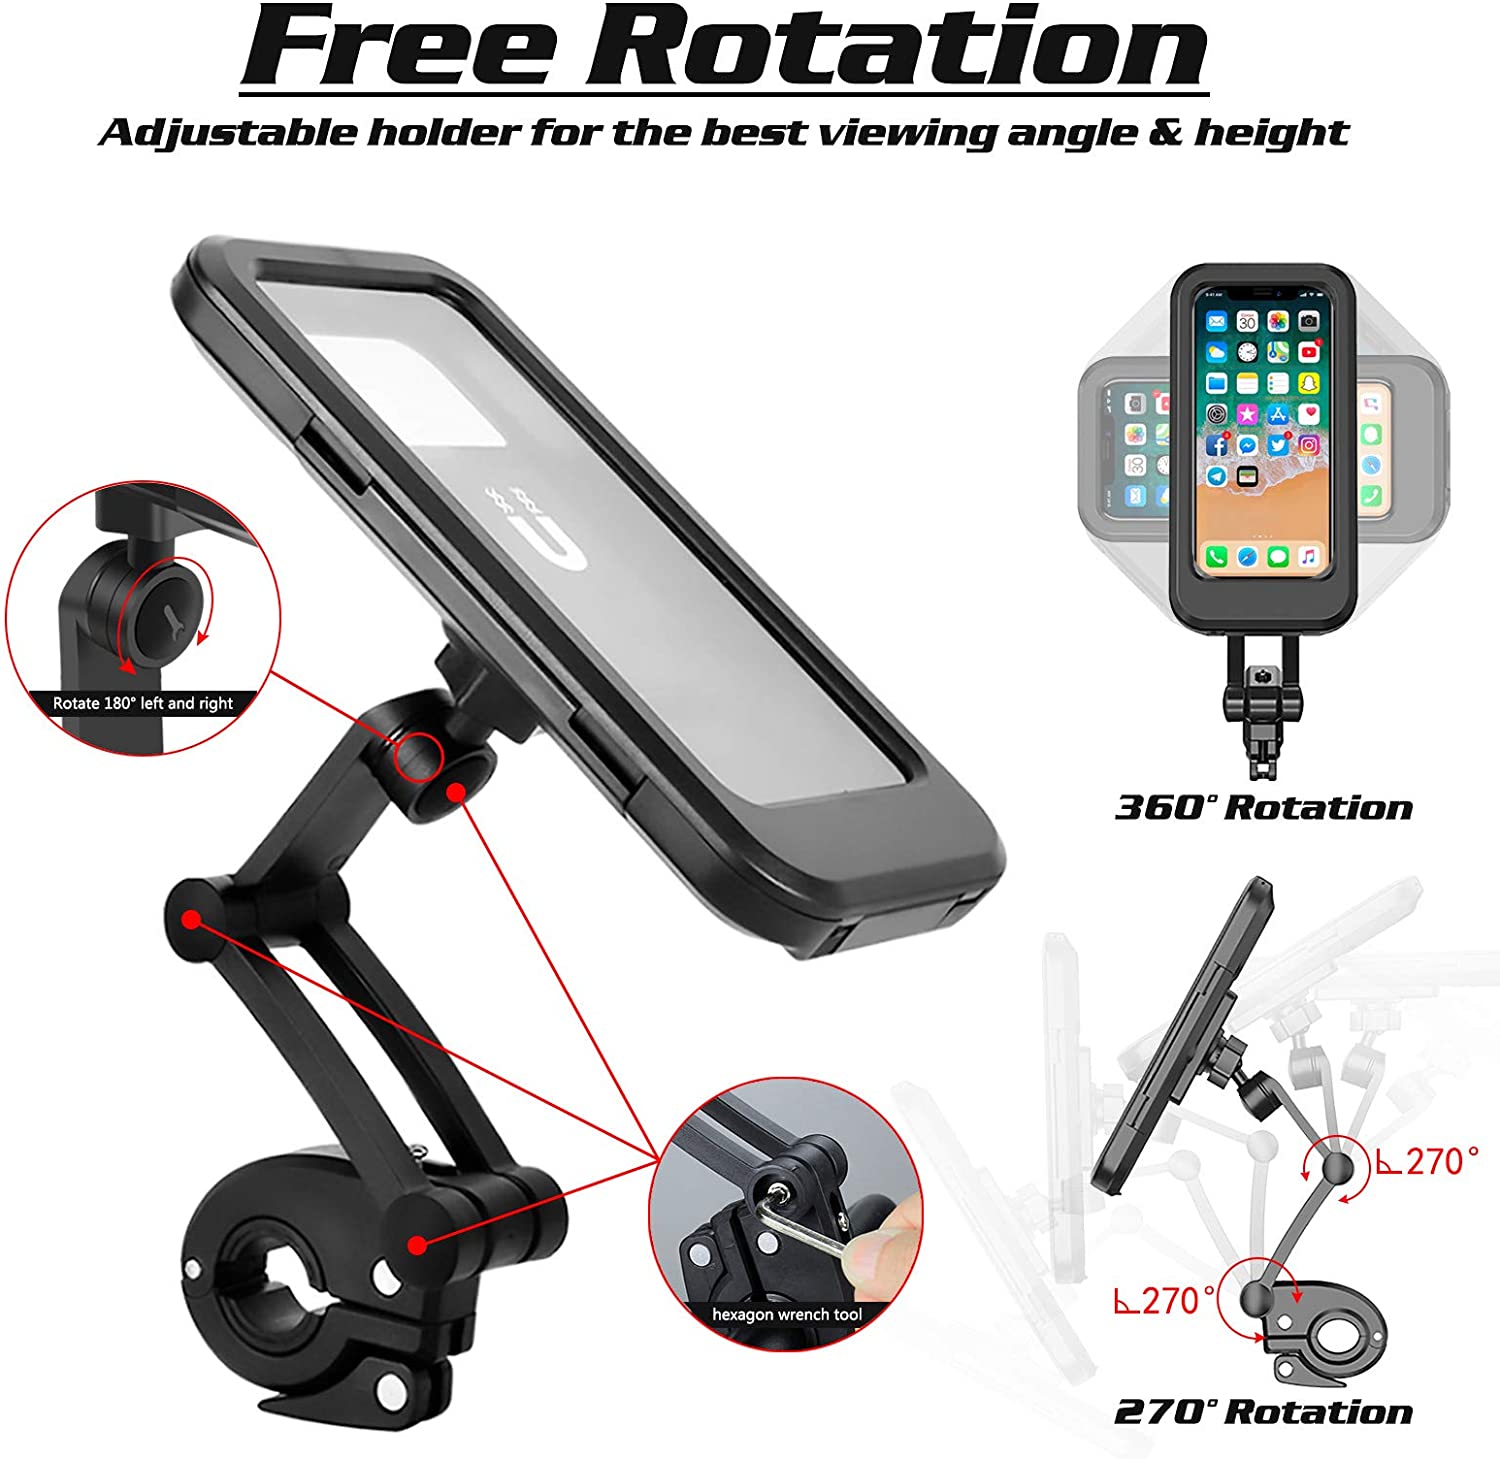 Sounce Waterproof New Bike Phone Mount Anti Shake and Stable 360‚° Rotation Bike  Bicycles Accessories for Any Smartphone GPS Other Devices Between 3.5 and  6.5 inches 